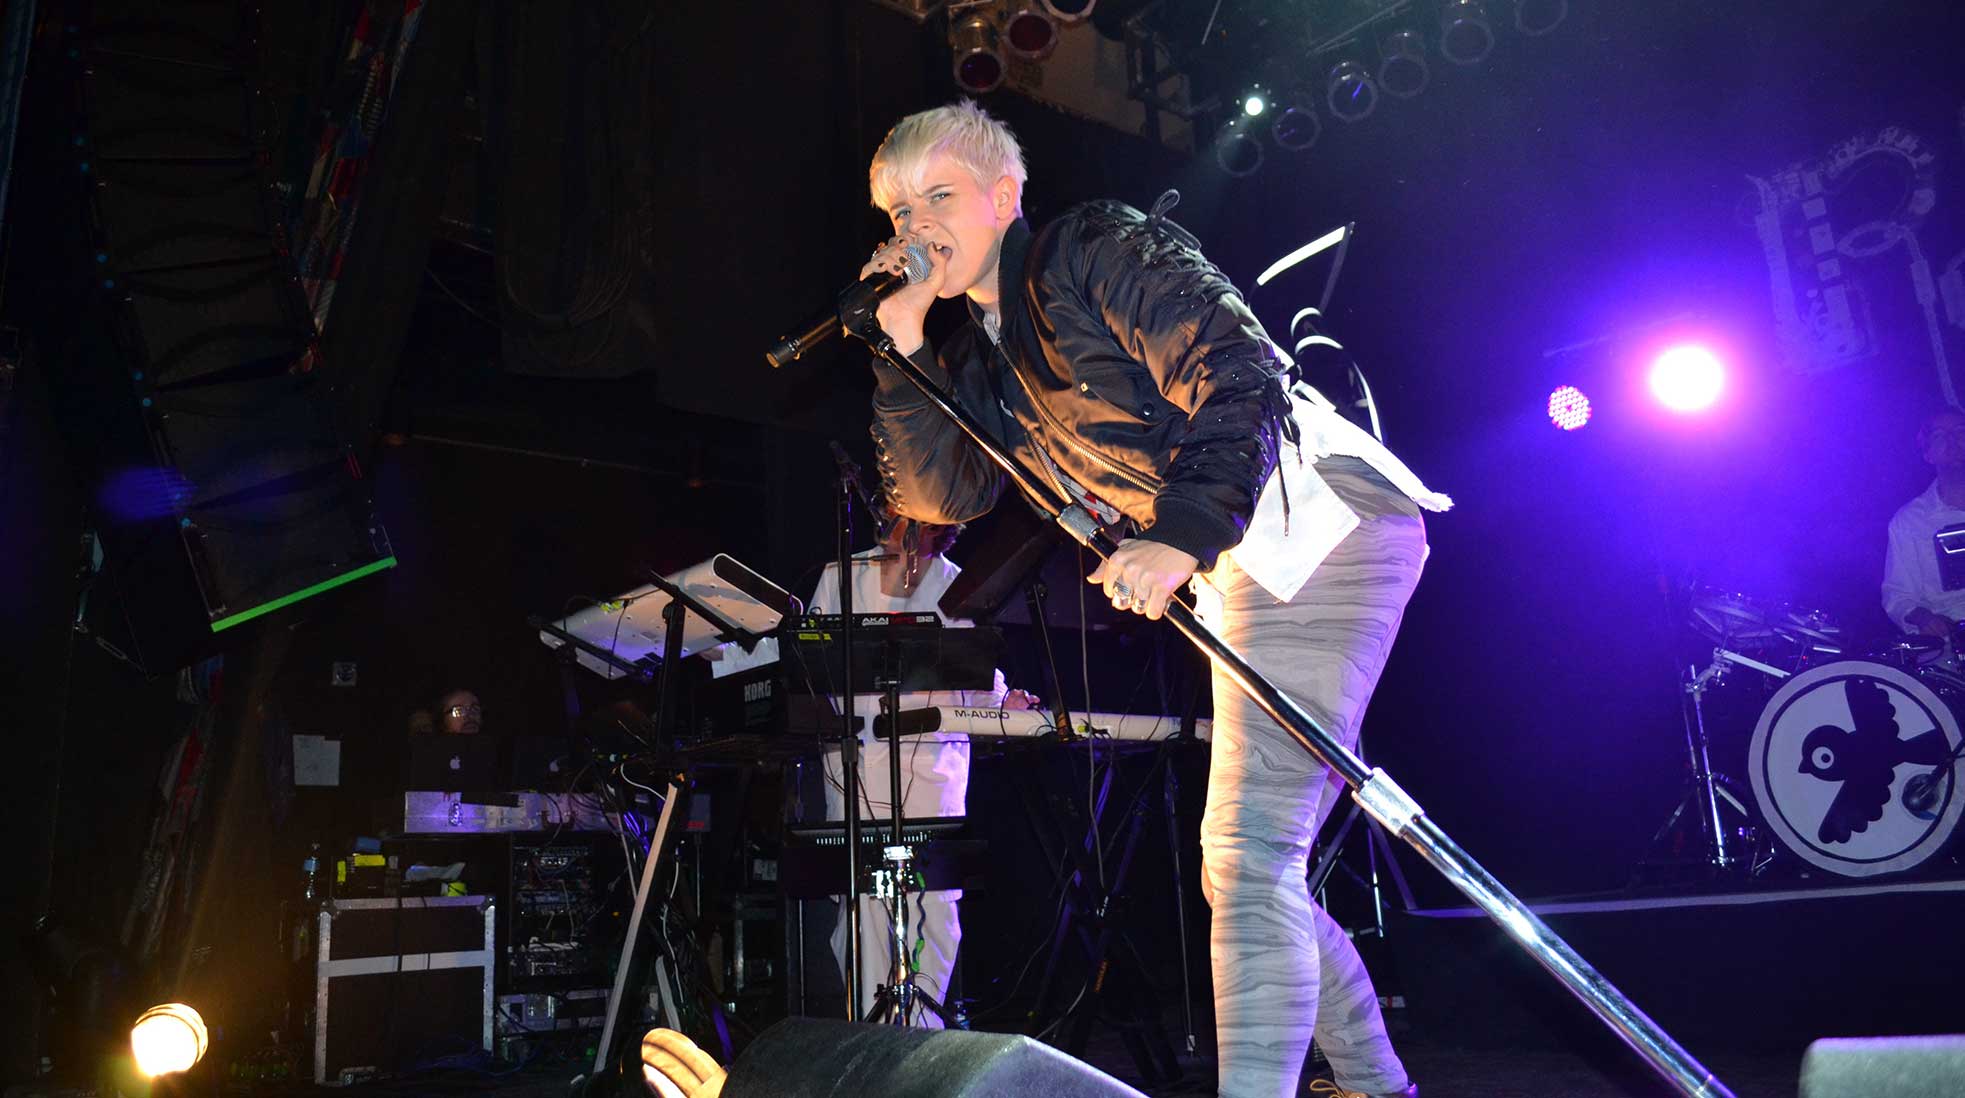 The Swedish artist Robyn performing on stage